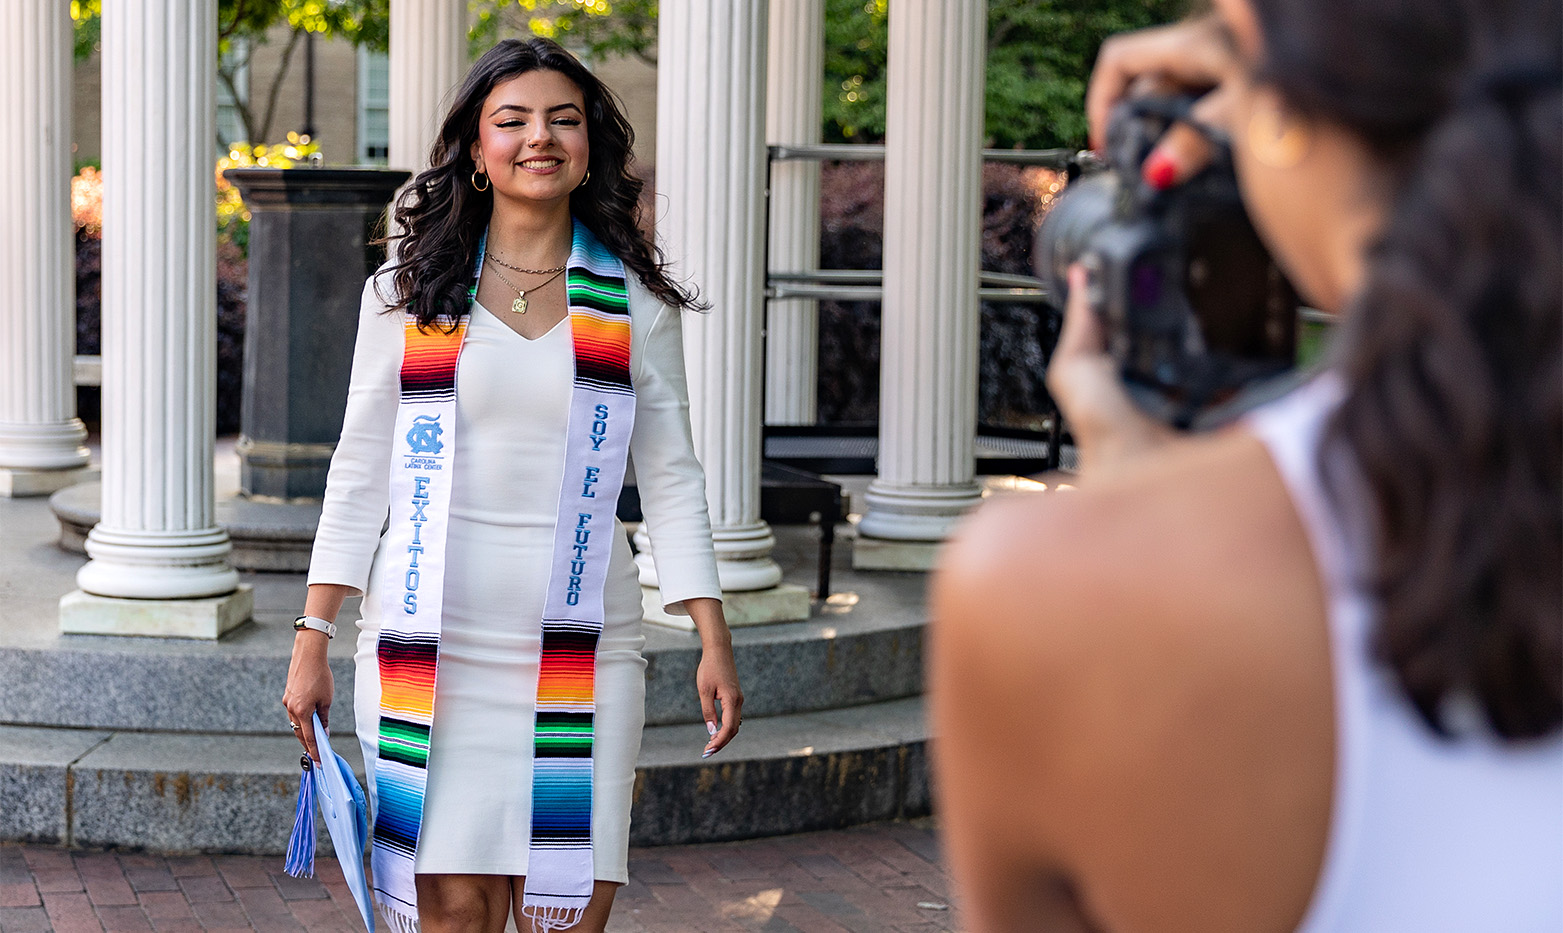 A UNC student wearing an Exitos graduation stoll.